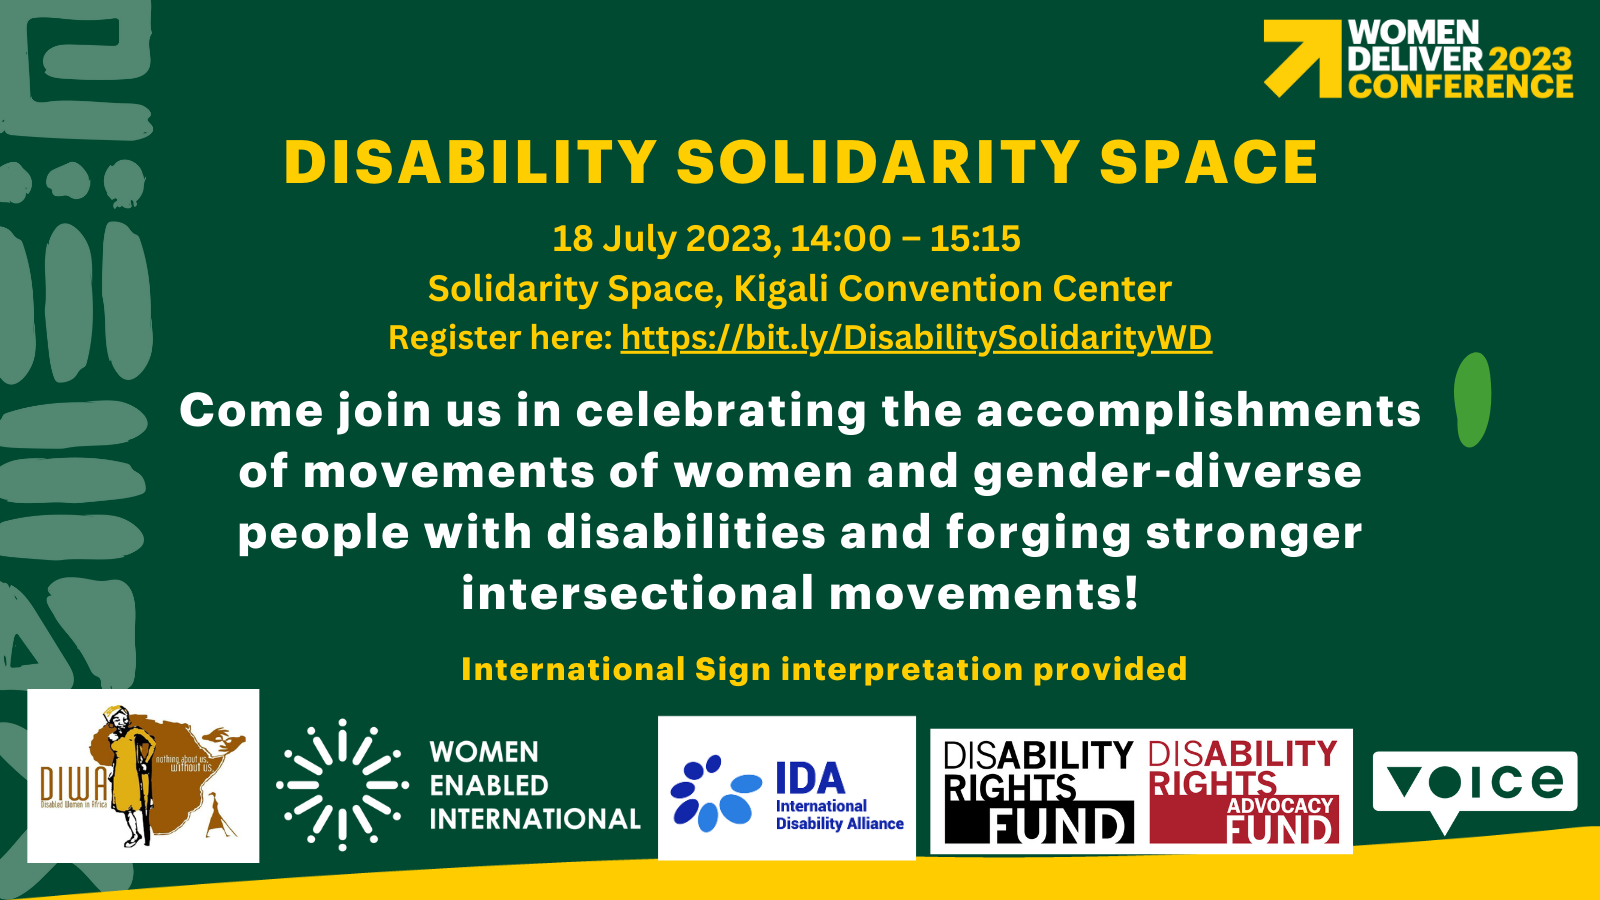 A green flyer with text: Disability Solidarity Space. Come join us in celebrating the accomplishments of the movements of women and gender-diverse people with disabilities and forge stronger intersectional movements. International Sign interpretation will be provided.